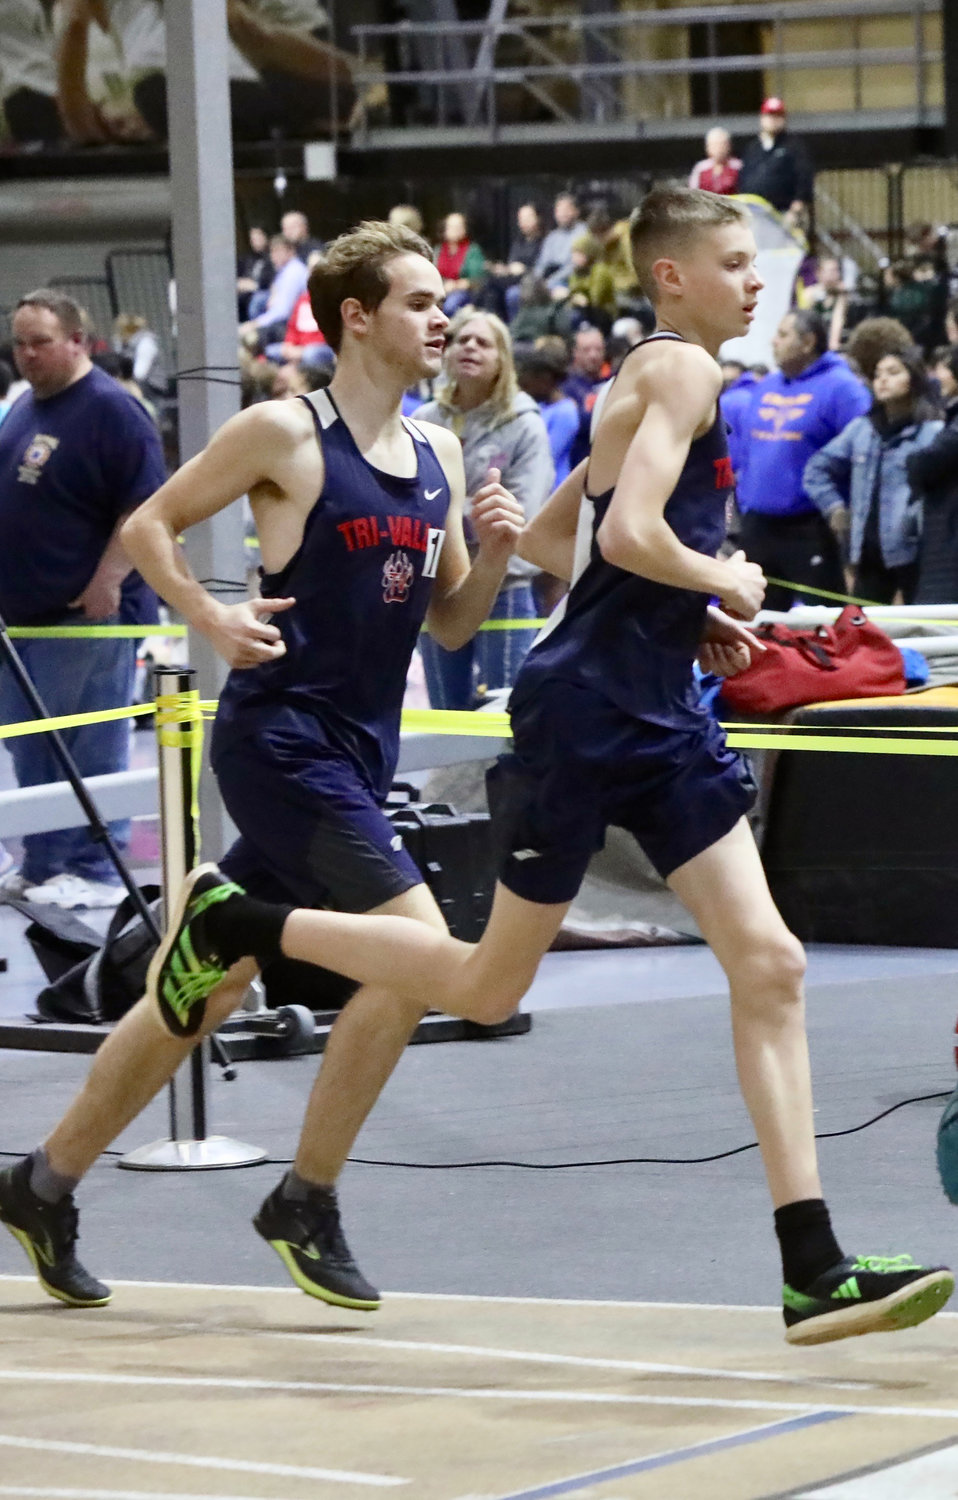 Tri-Valley’s Van Furman and Craig Costa take 1,2 in Division VI the 3200.